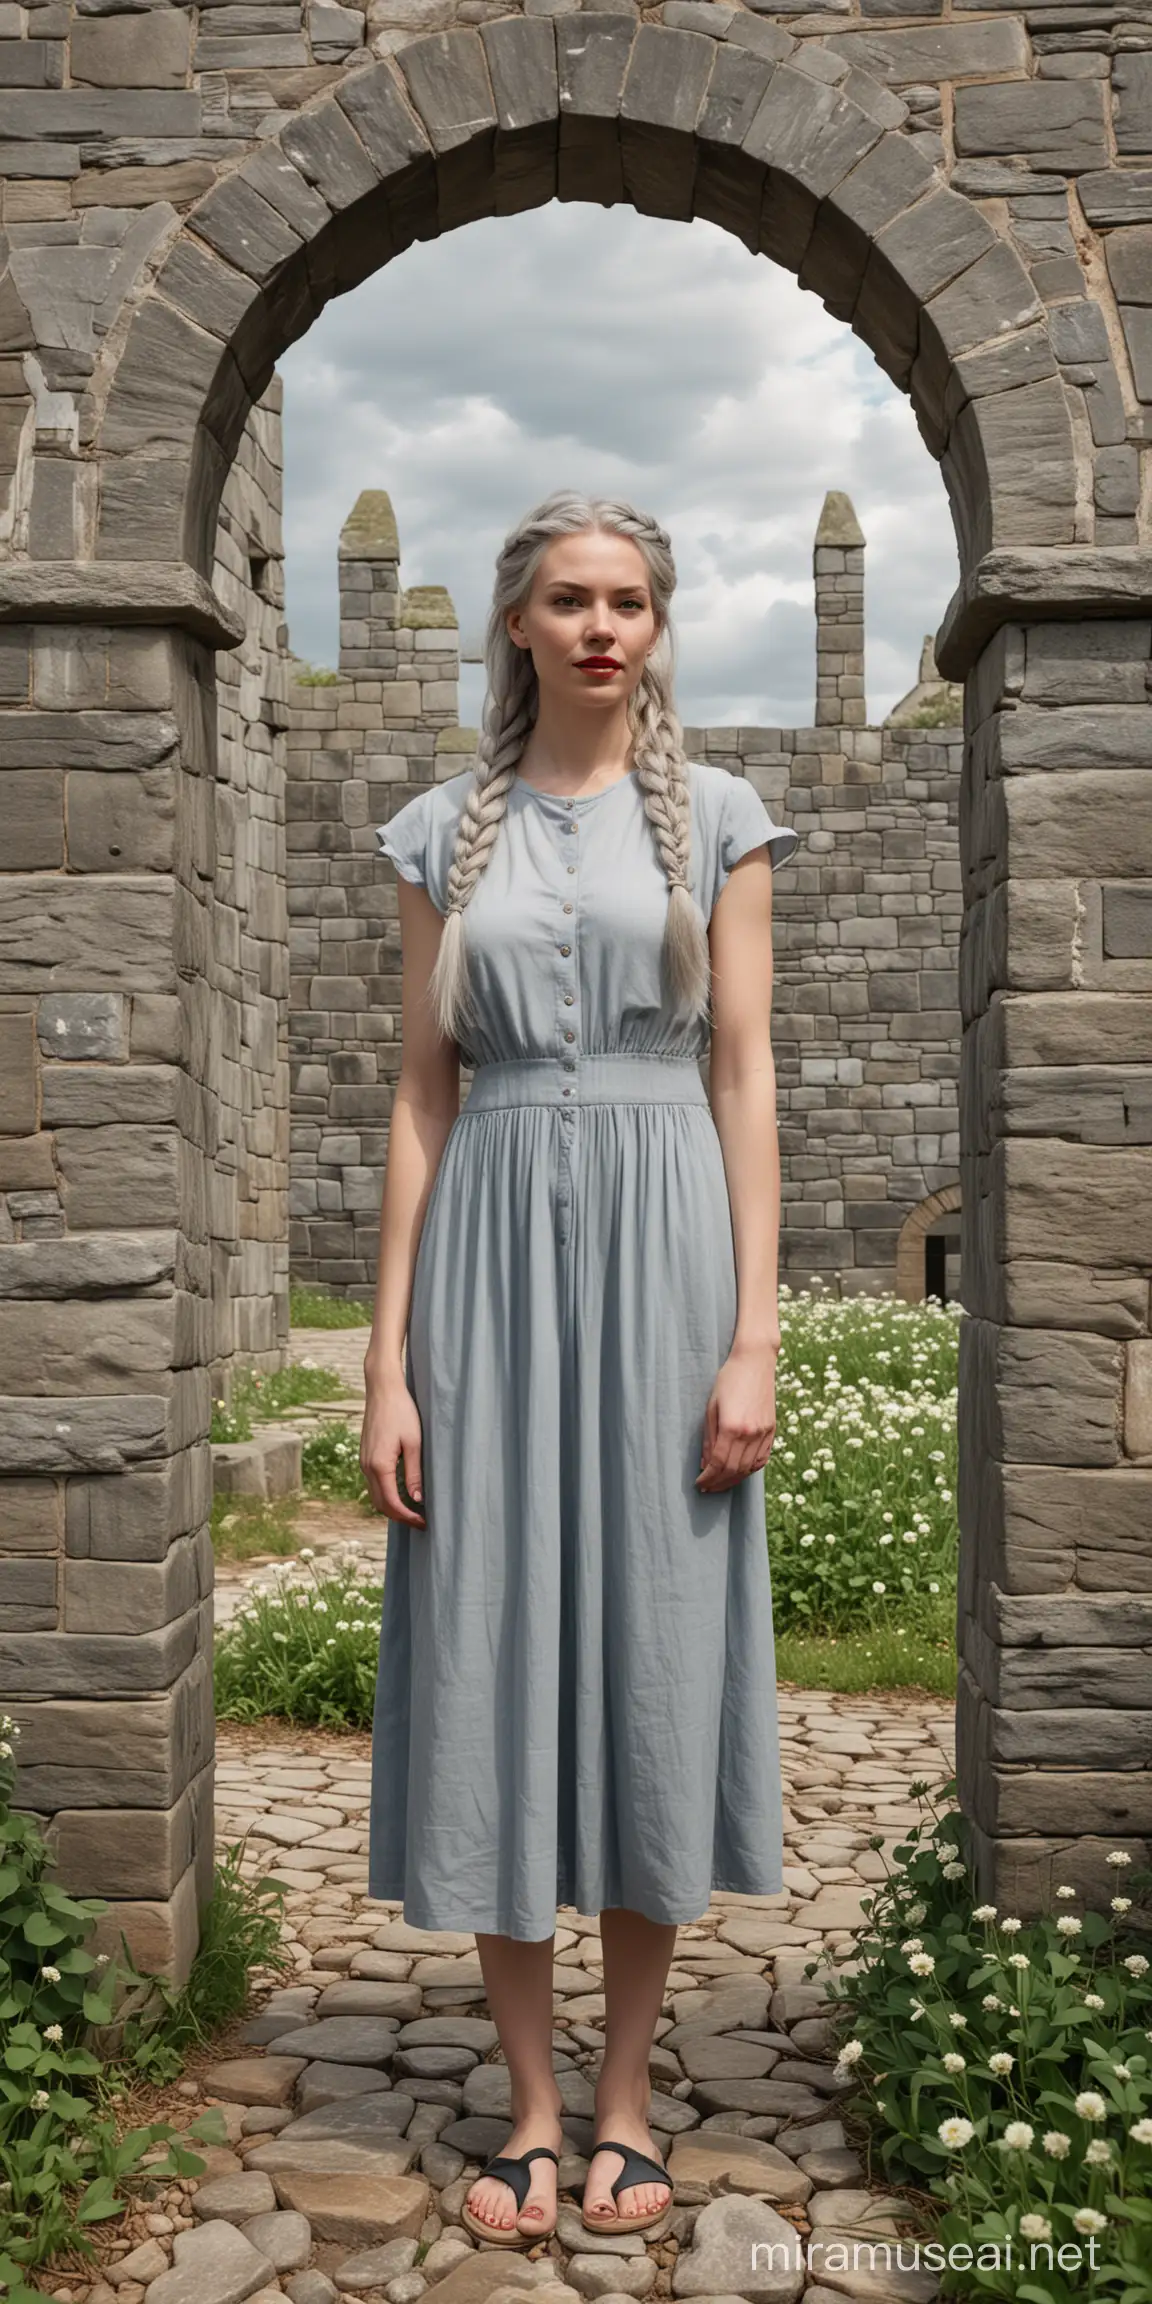 a realistic full body portrait of  a woman with long grey braided hair, a big red nose, pale skin, looking grumpy into the camera, behind her a stone arch , one bare foot forward, holding up a big white clover flower in protest, 